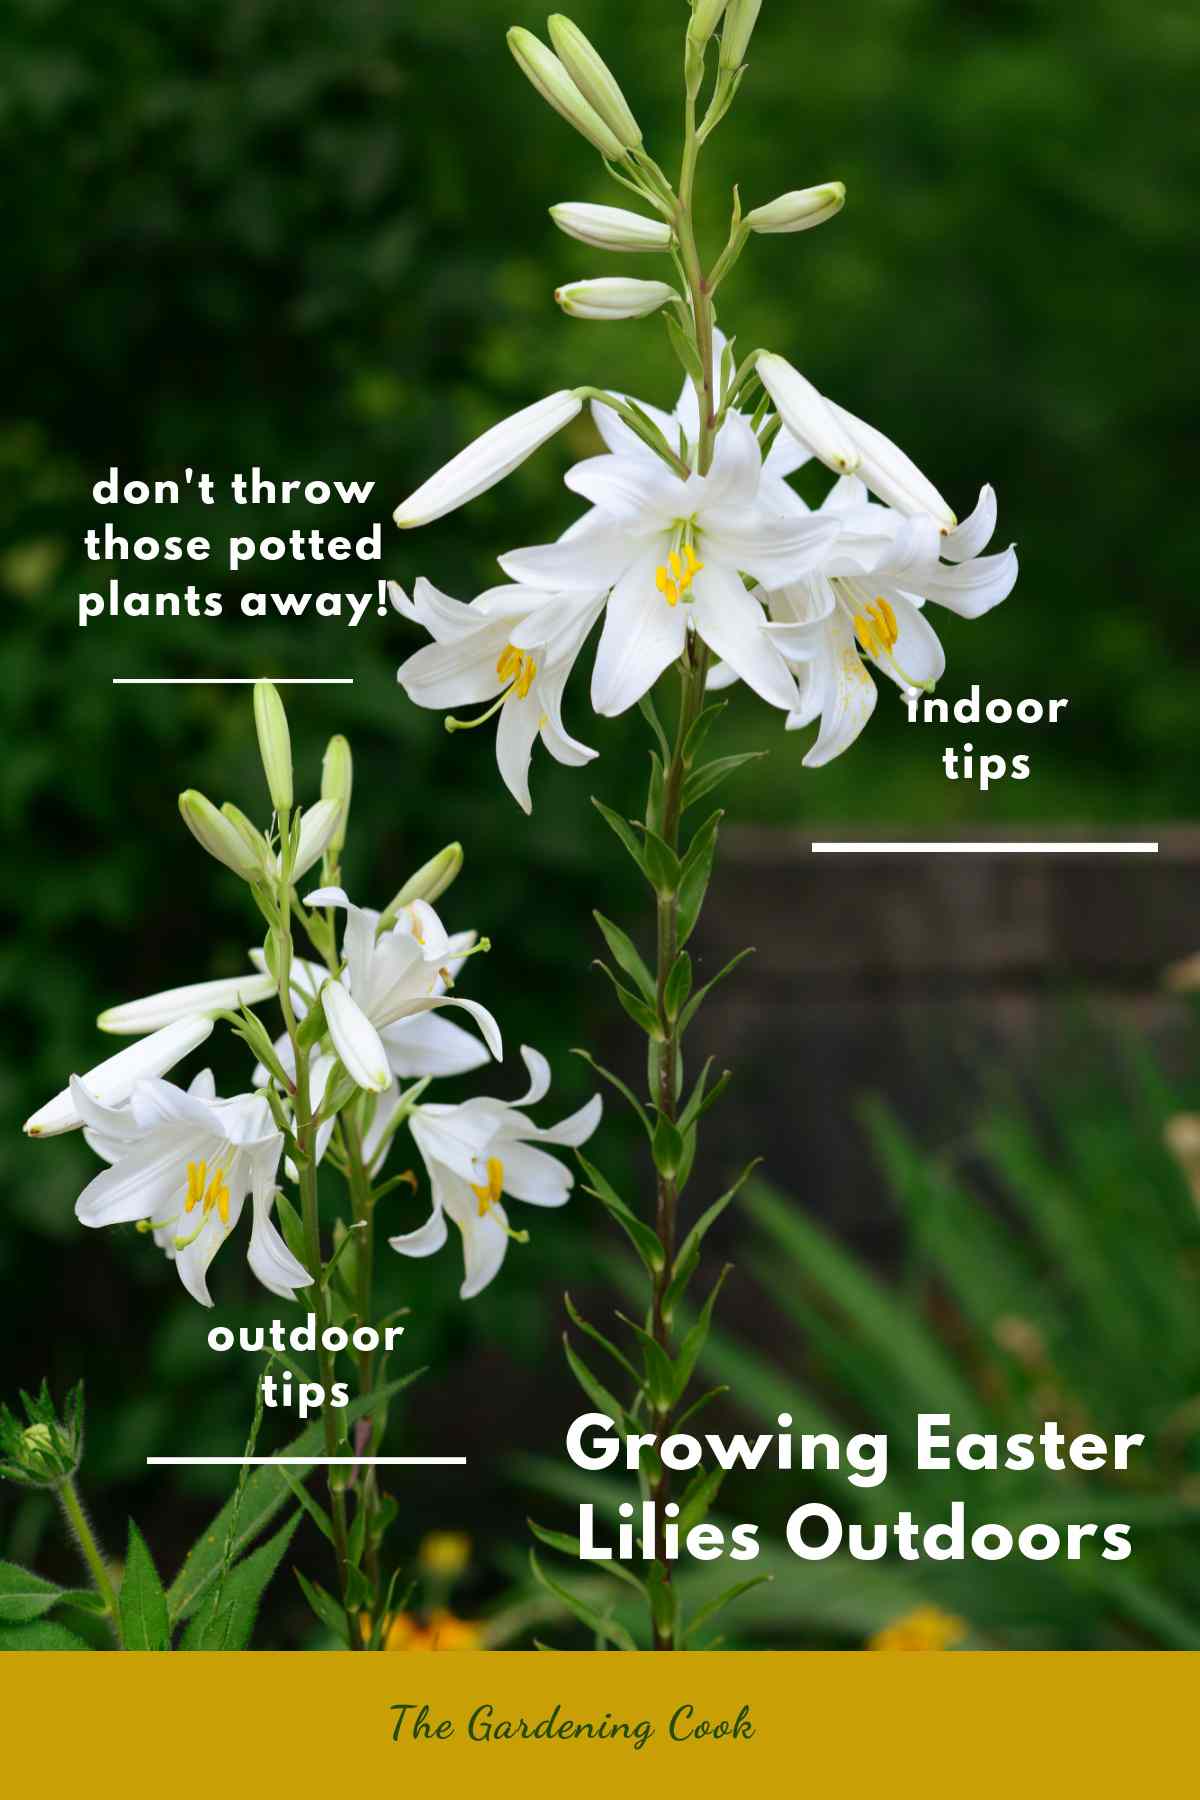 Easter lily in a garden with words Growing Easter lily outdoors, - indoor tips, outdoor tips, don't throw those potted plants away!